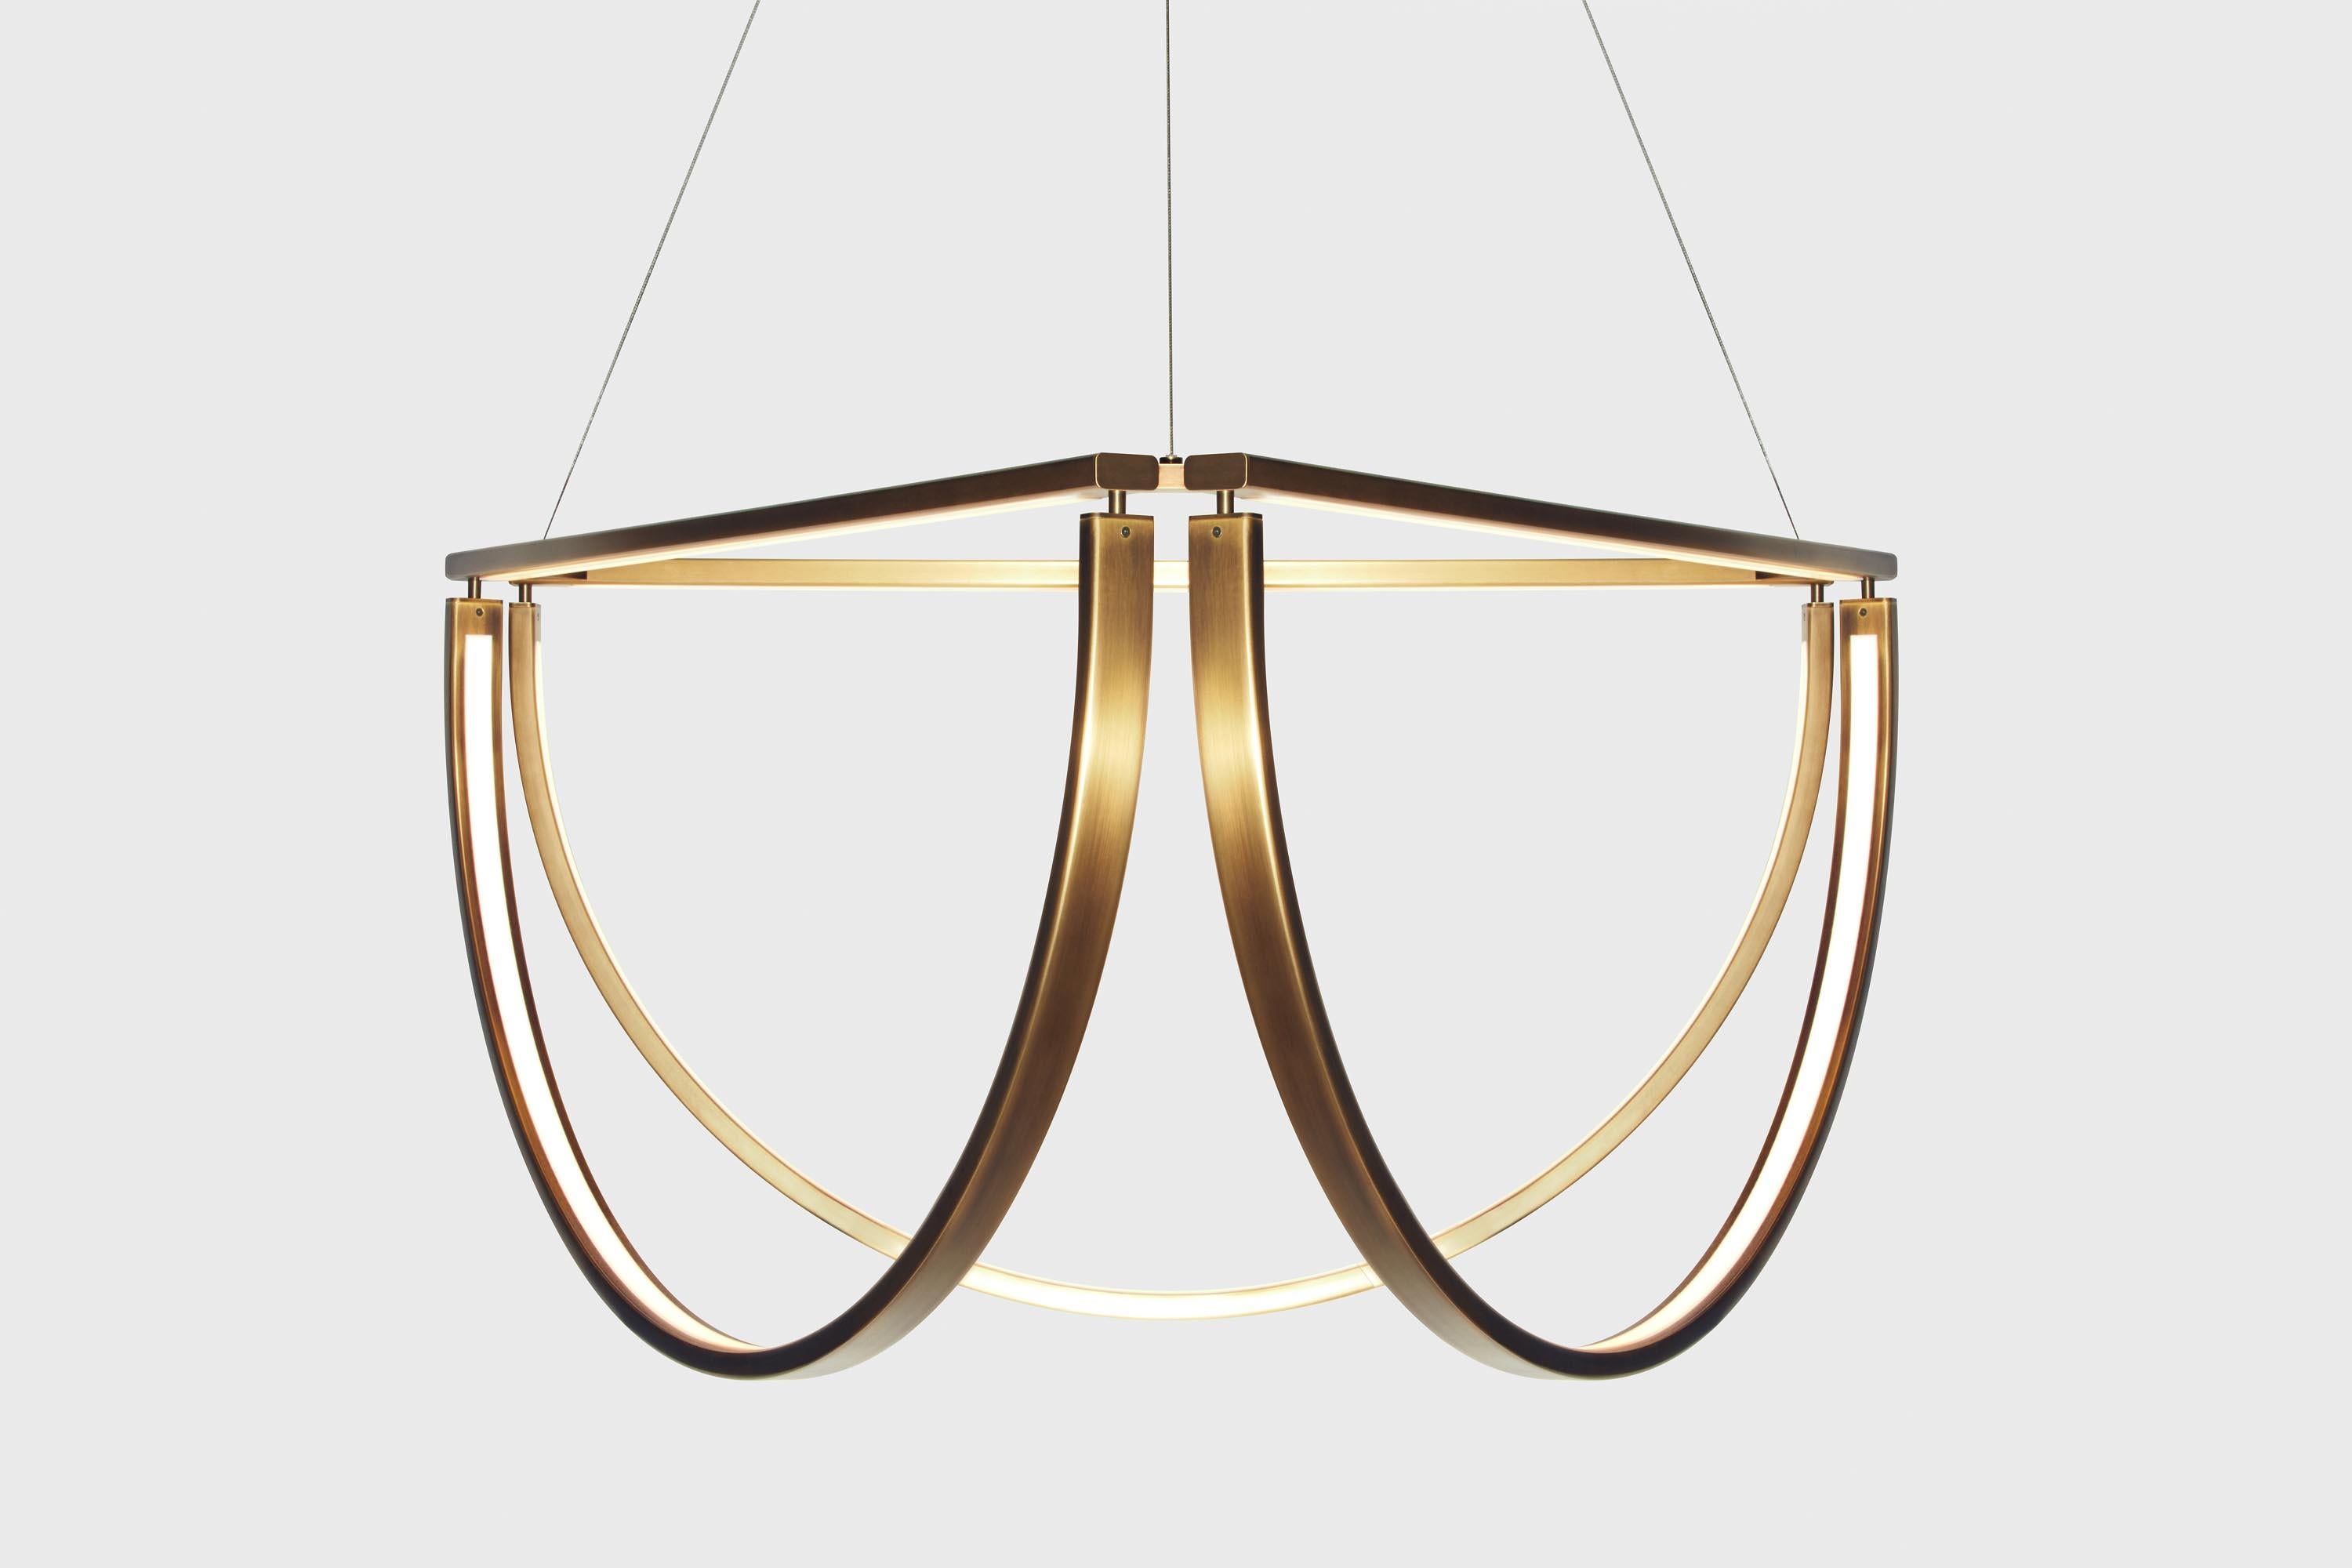 The chord cluster, the latest member of the Chord Family, is a modern reinterpretation of a familiar form. The elegant semi-circular shapes are reminiscent of the swagging curves of a traditional crystal chandelier. Like its counterparts, Chord and